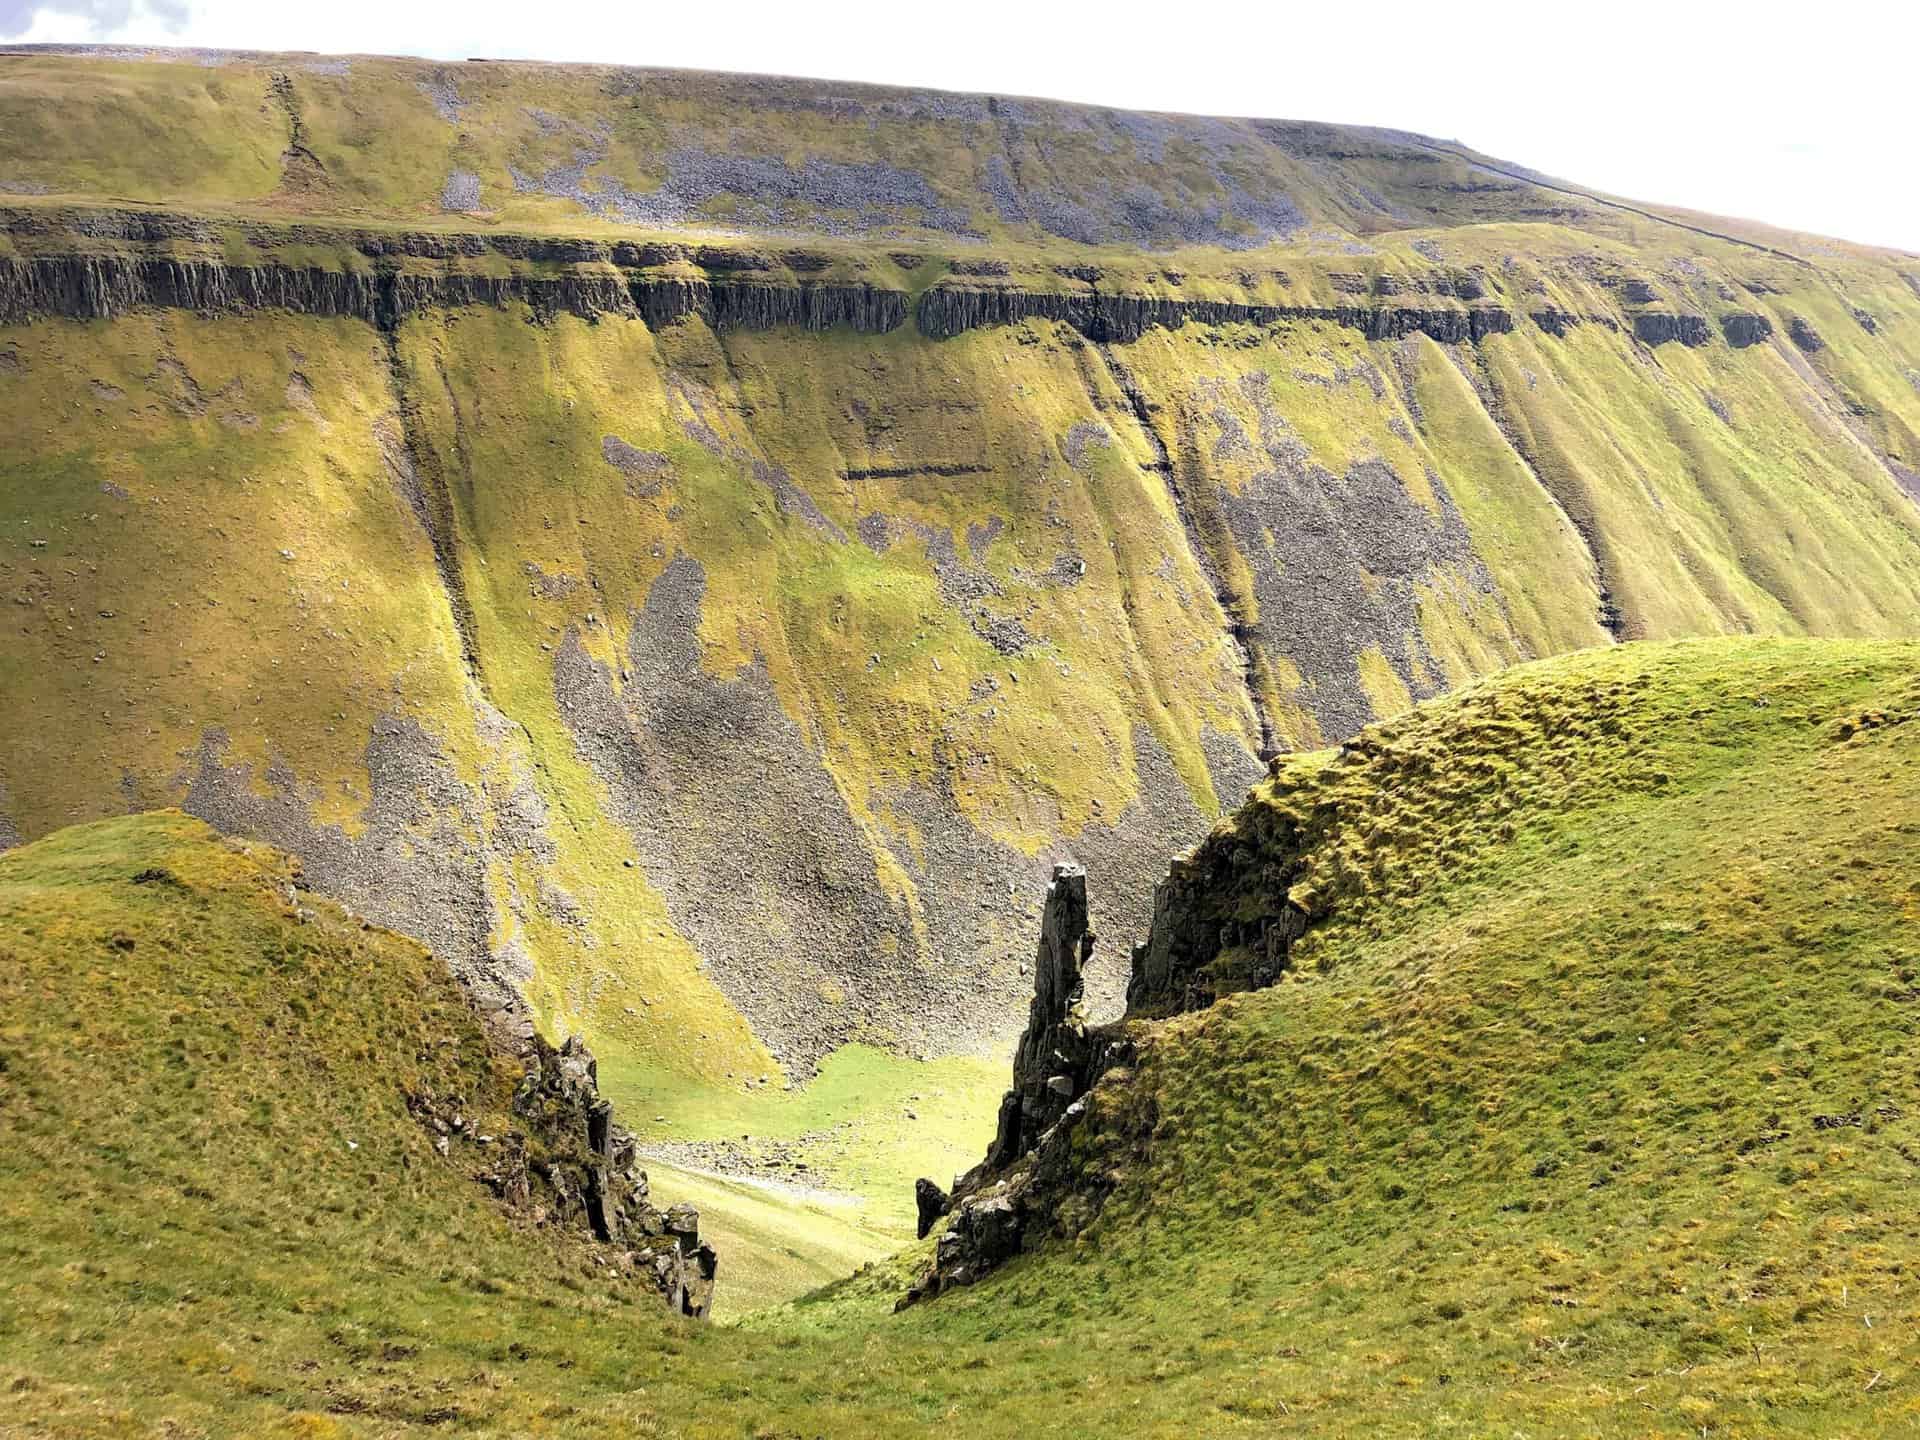 The dramatic, steep-sided slopes on the southern side of High Cup Gill.